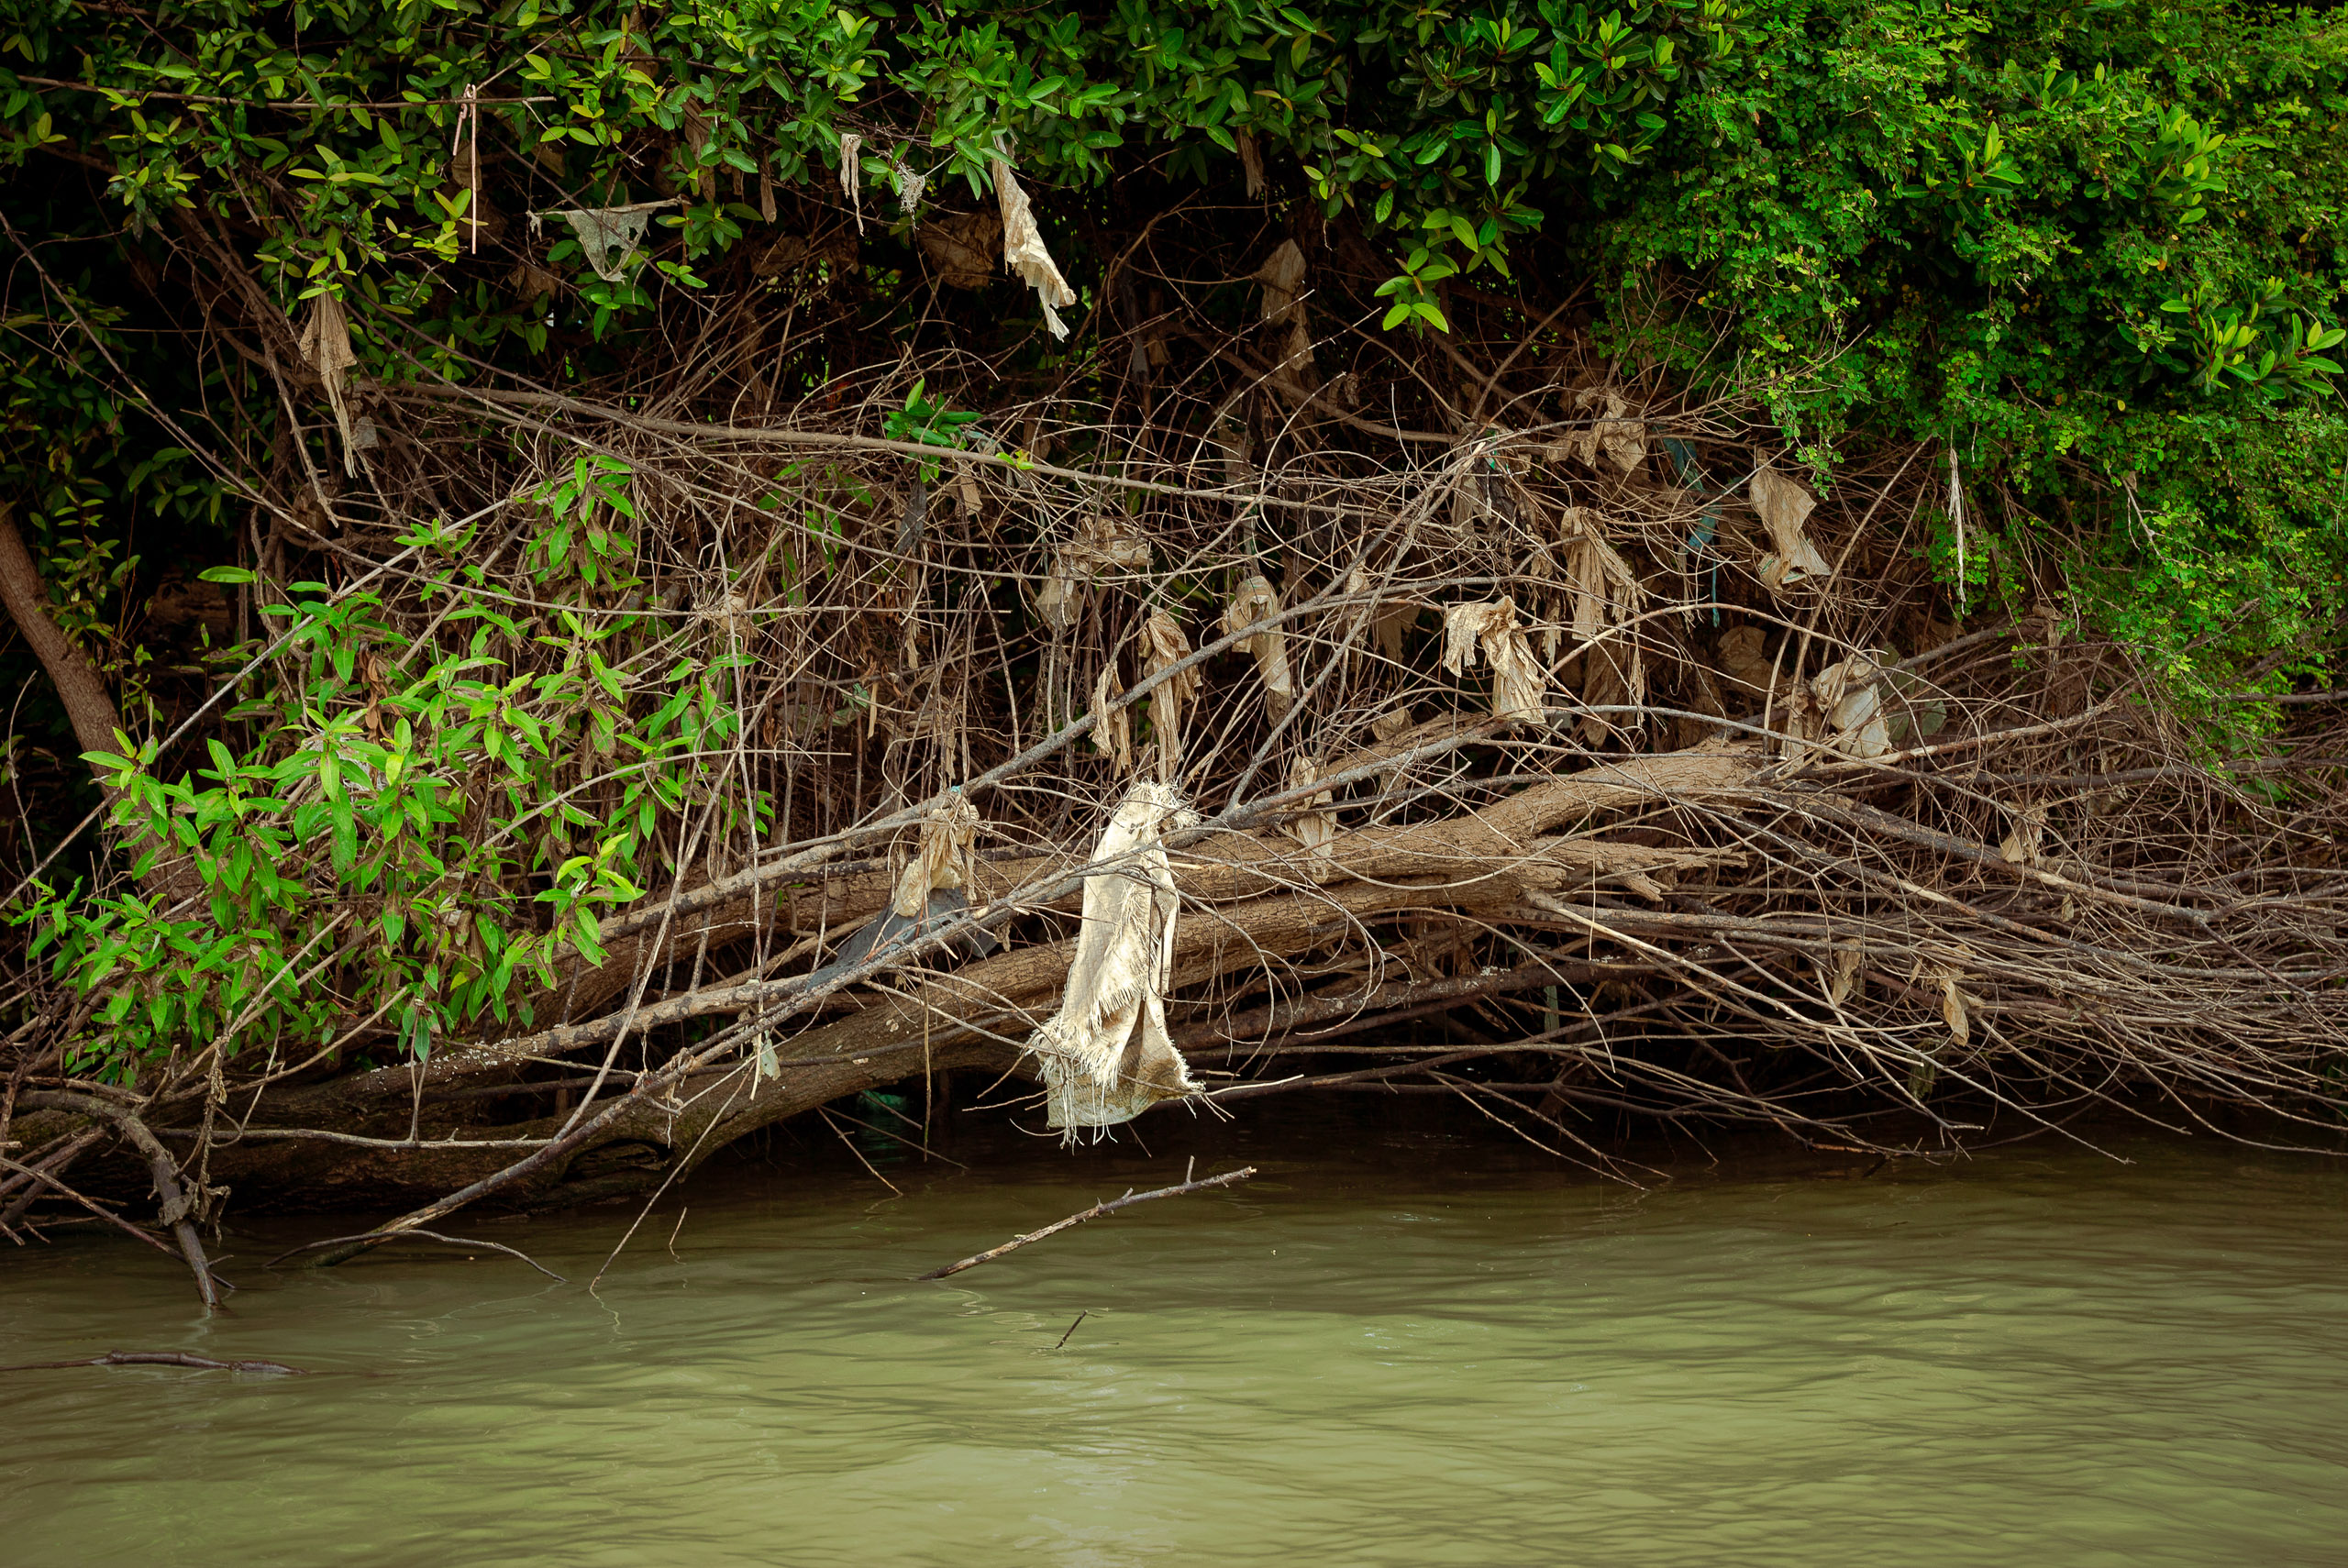 plastic caught in fallen branched hanging over murky water